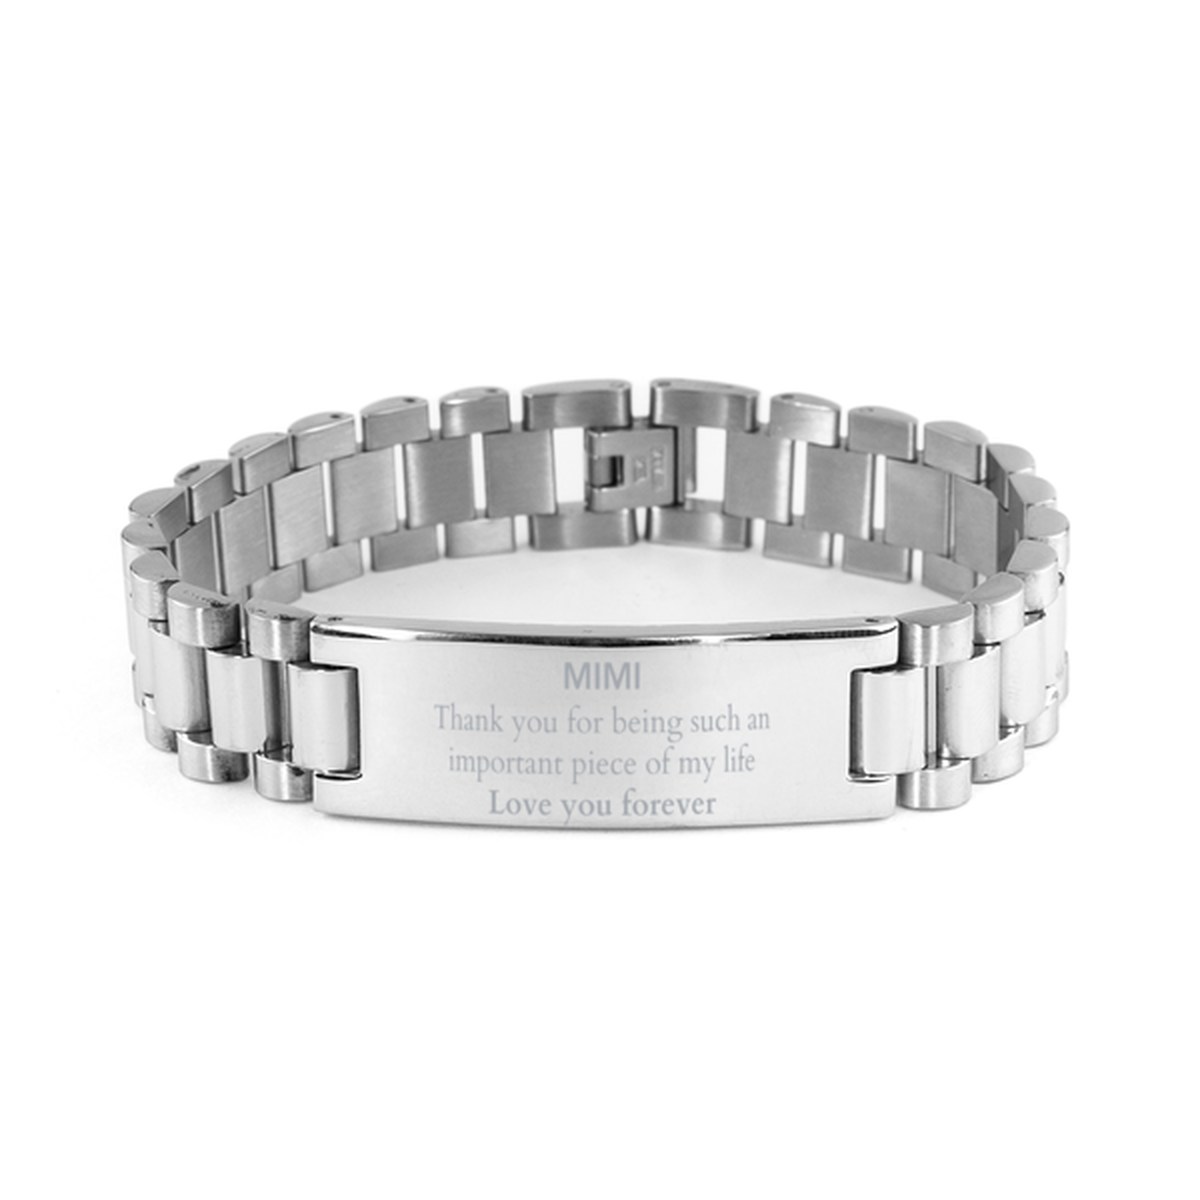 Appropriate Mimi Ladder Stainless Steel Bracelet Epic Birthday Gifts for Mimi Thank you for being such an important piece of my life Mimi Christmas Mothers Fathers Day